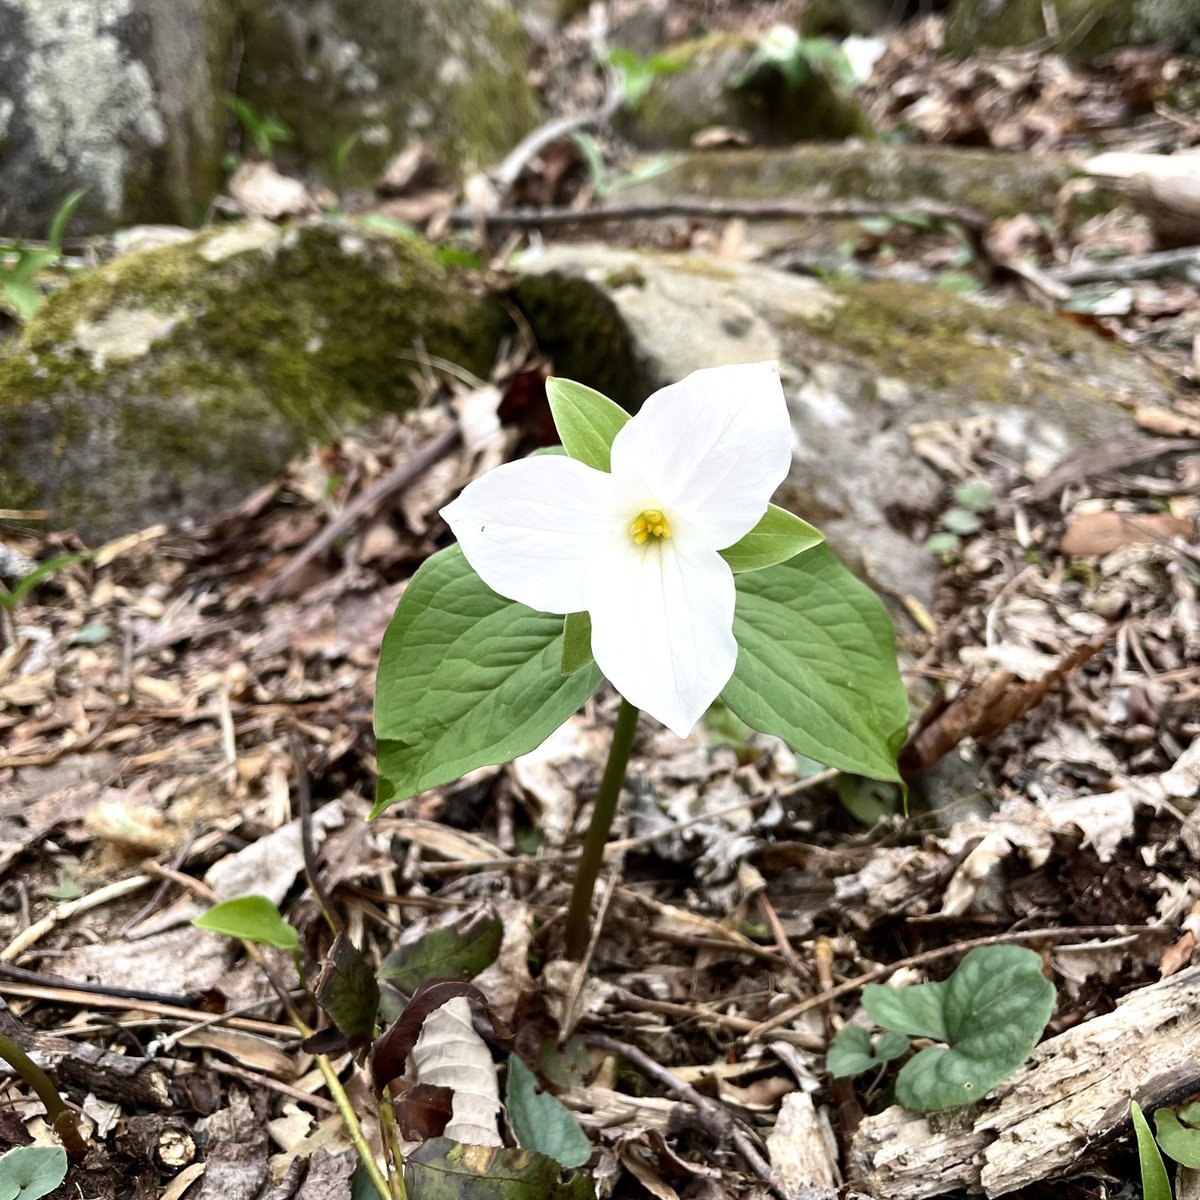 Name that flower! I am a perennial wildflower that typically blooms in April in GSMNP. I have a range that spans from Canada to Georgia. I have 3 big white petals that may turn pink with age. Despite my appealing look, my flower is odorless.